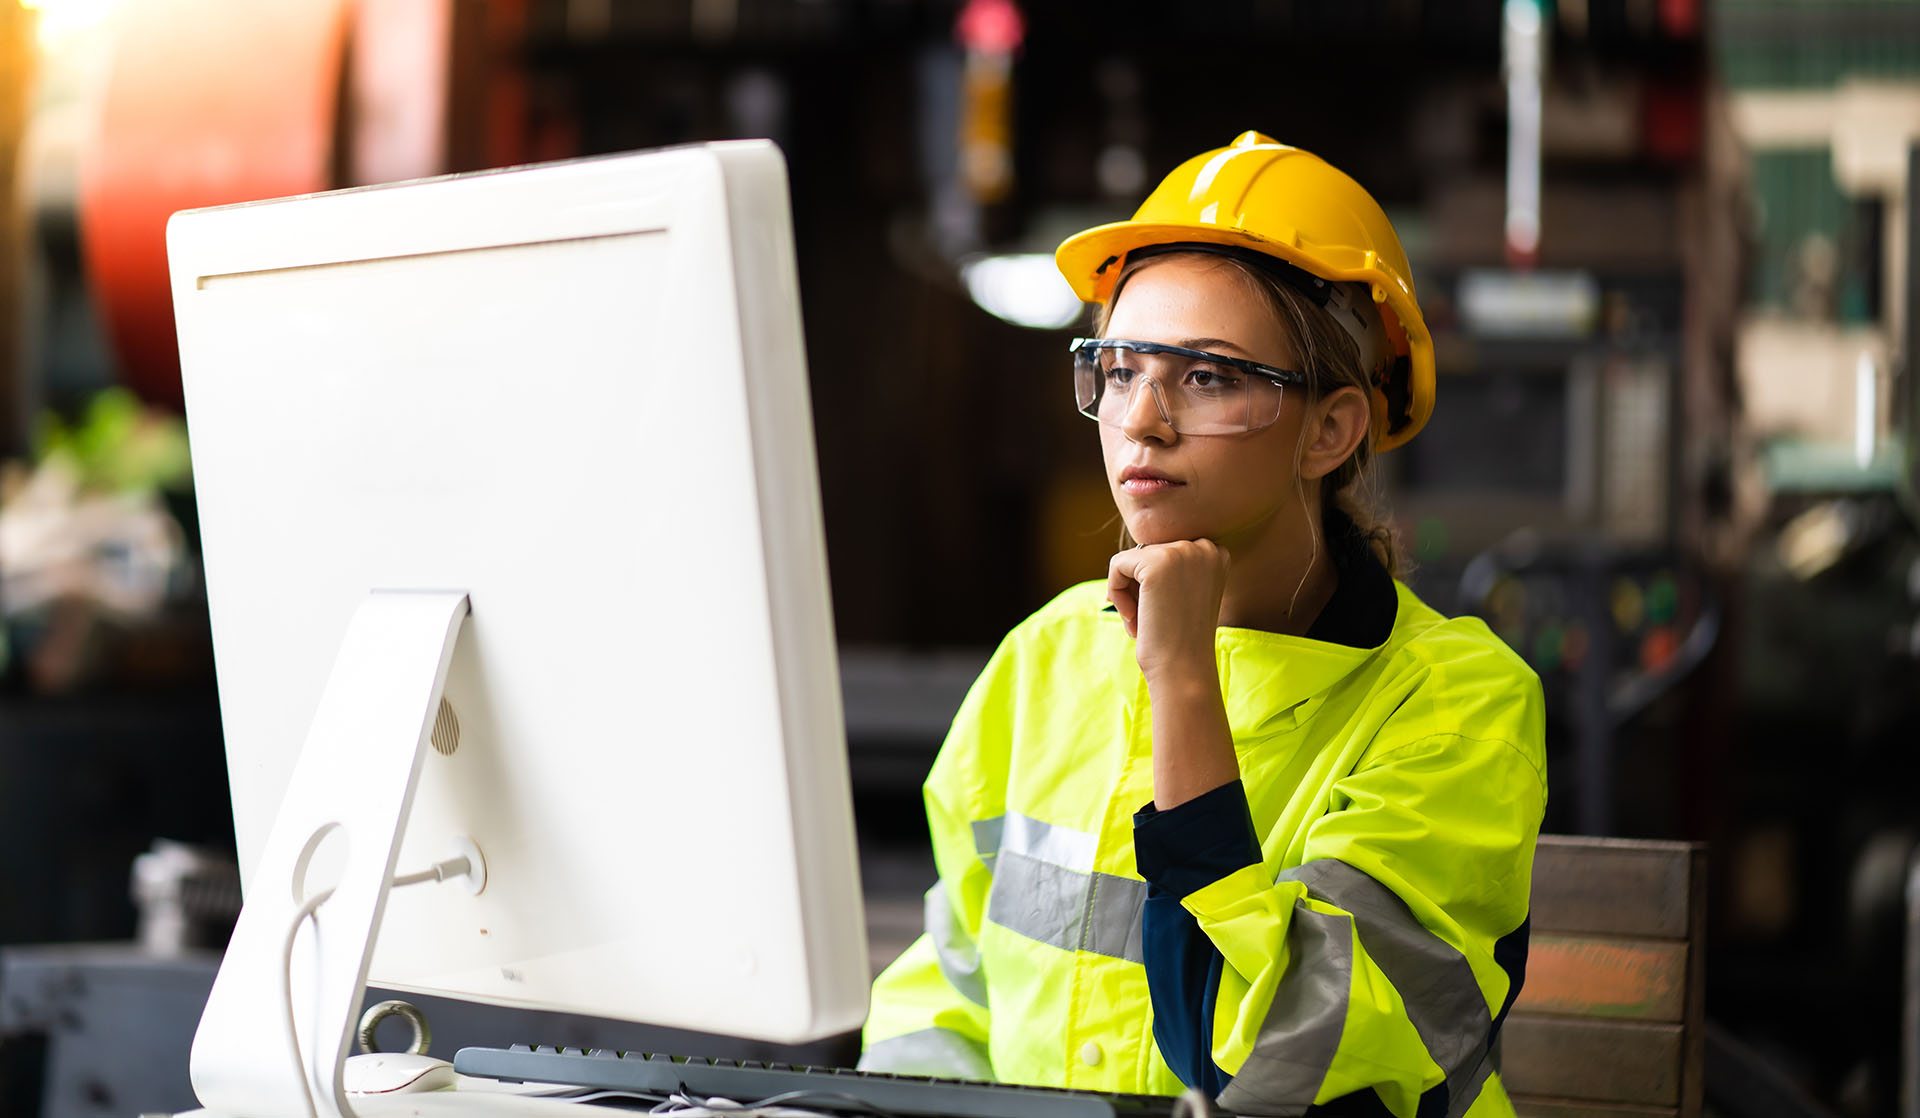 A woman in a hard hat reviews training materials on a computer.